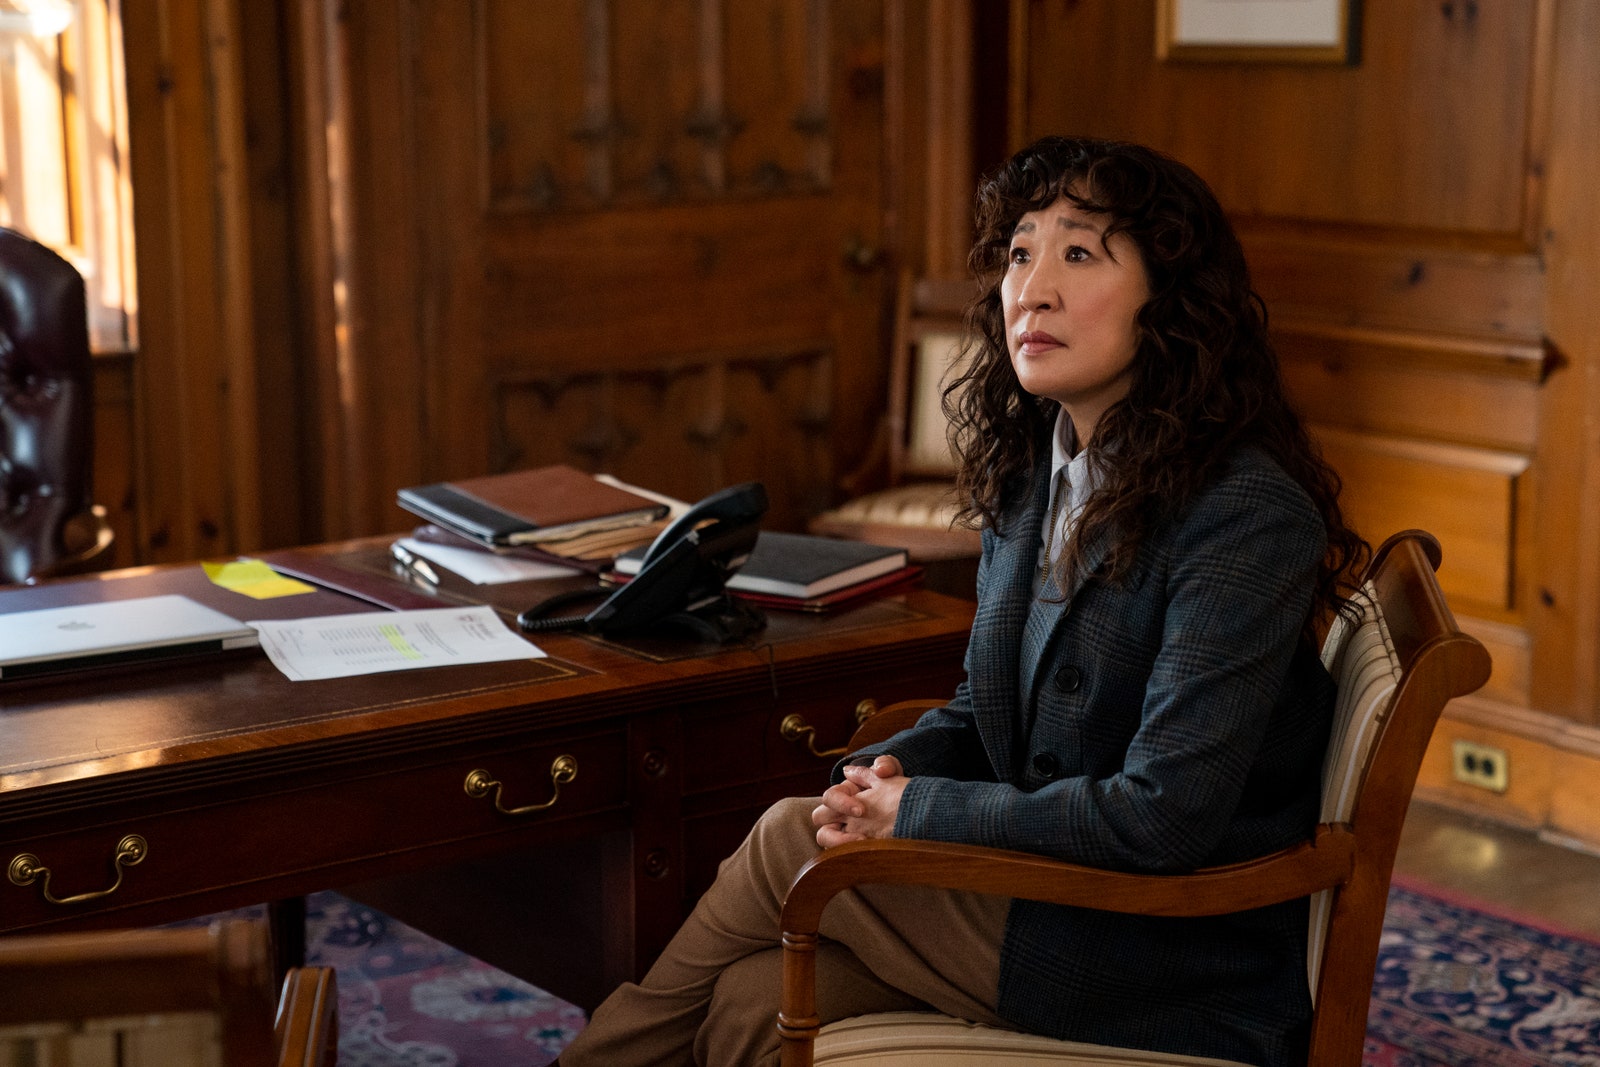 Image may contain Furniture Desk Table Chair Human Person Sandra Oh Wood Couch Sitting Electronics and Computer